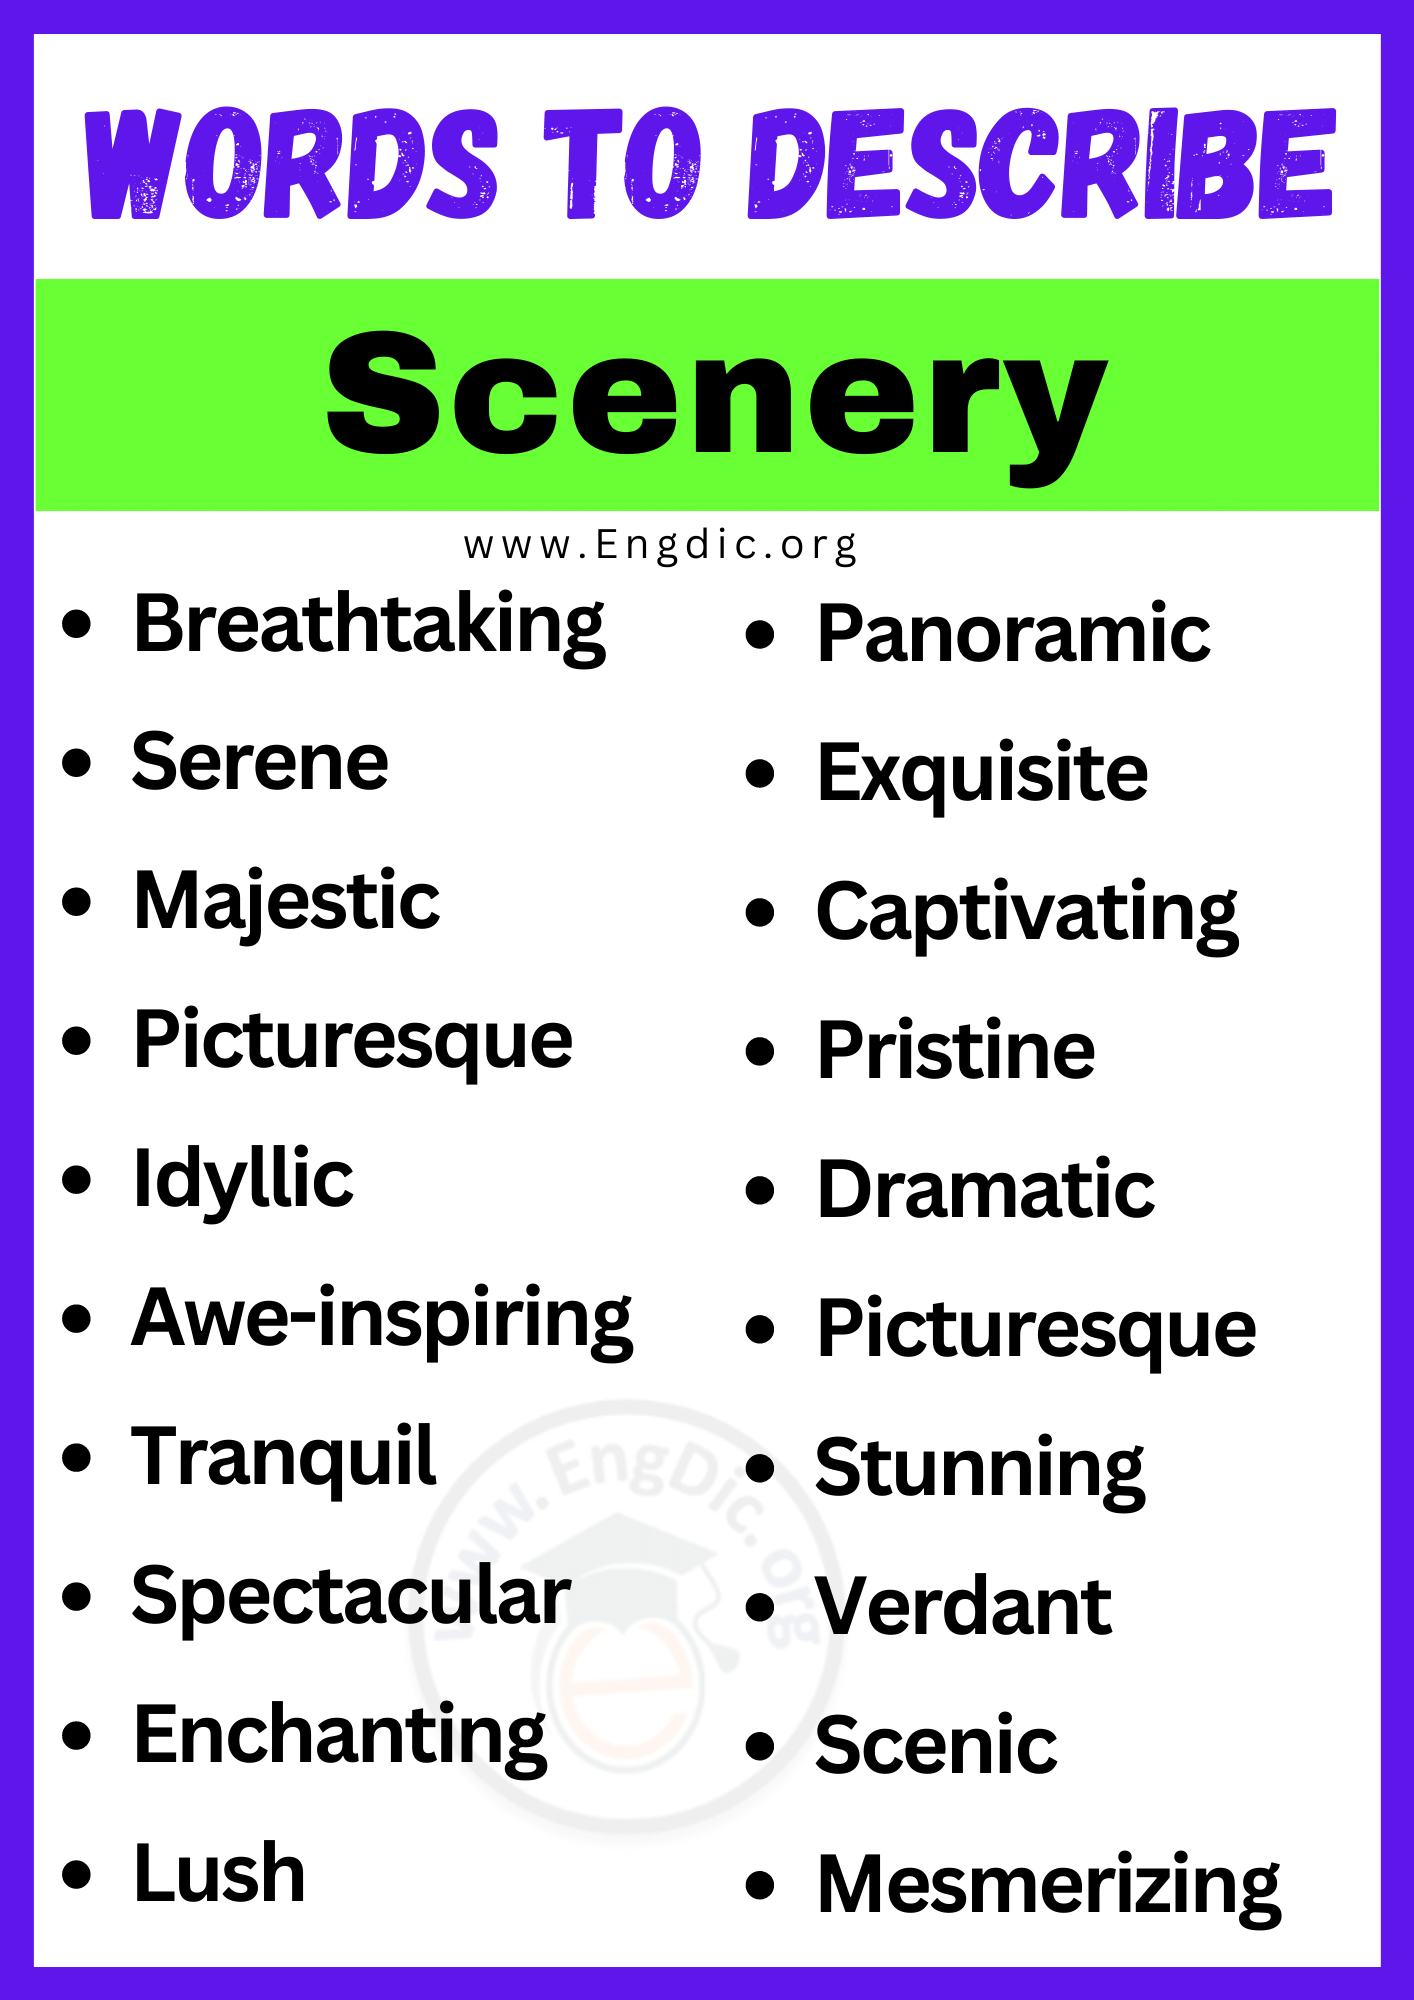 Words to Describe Scenery